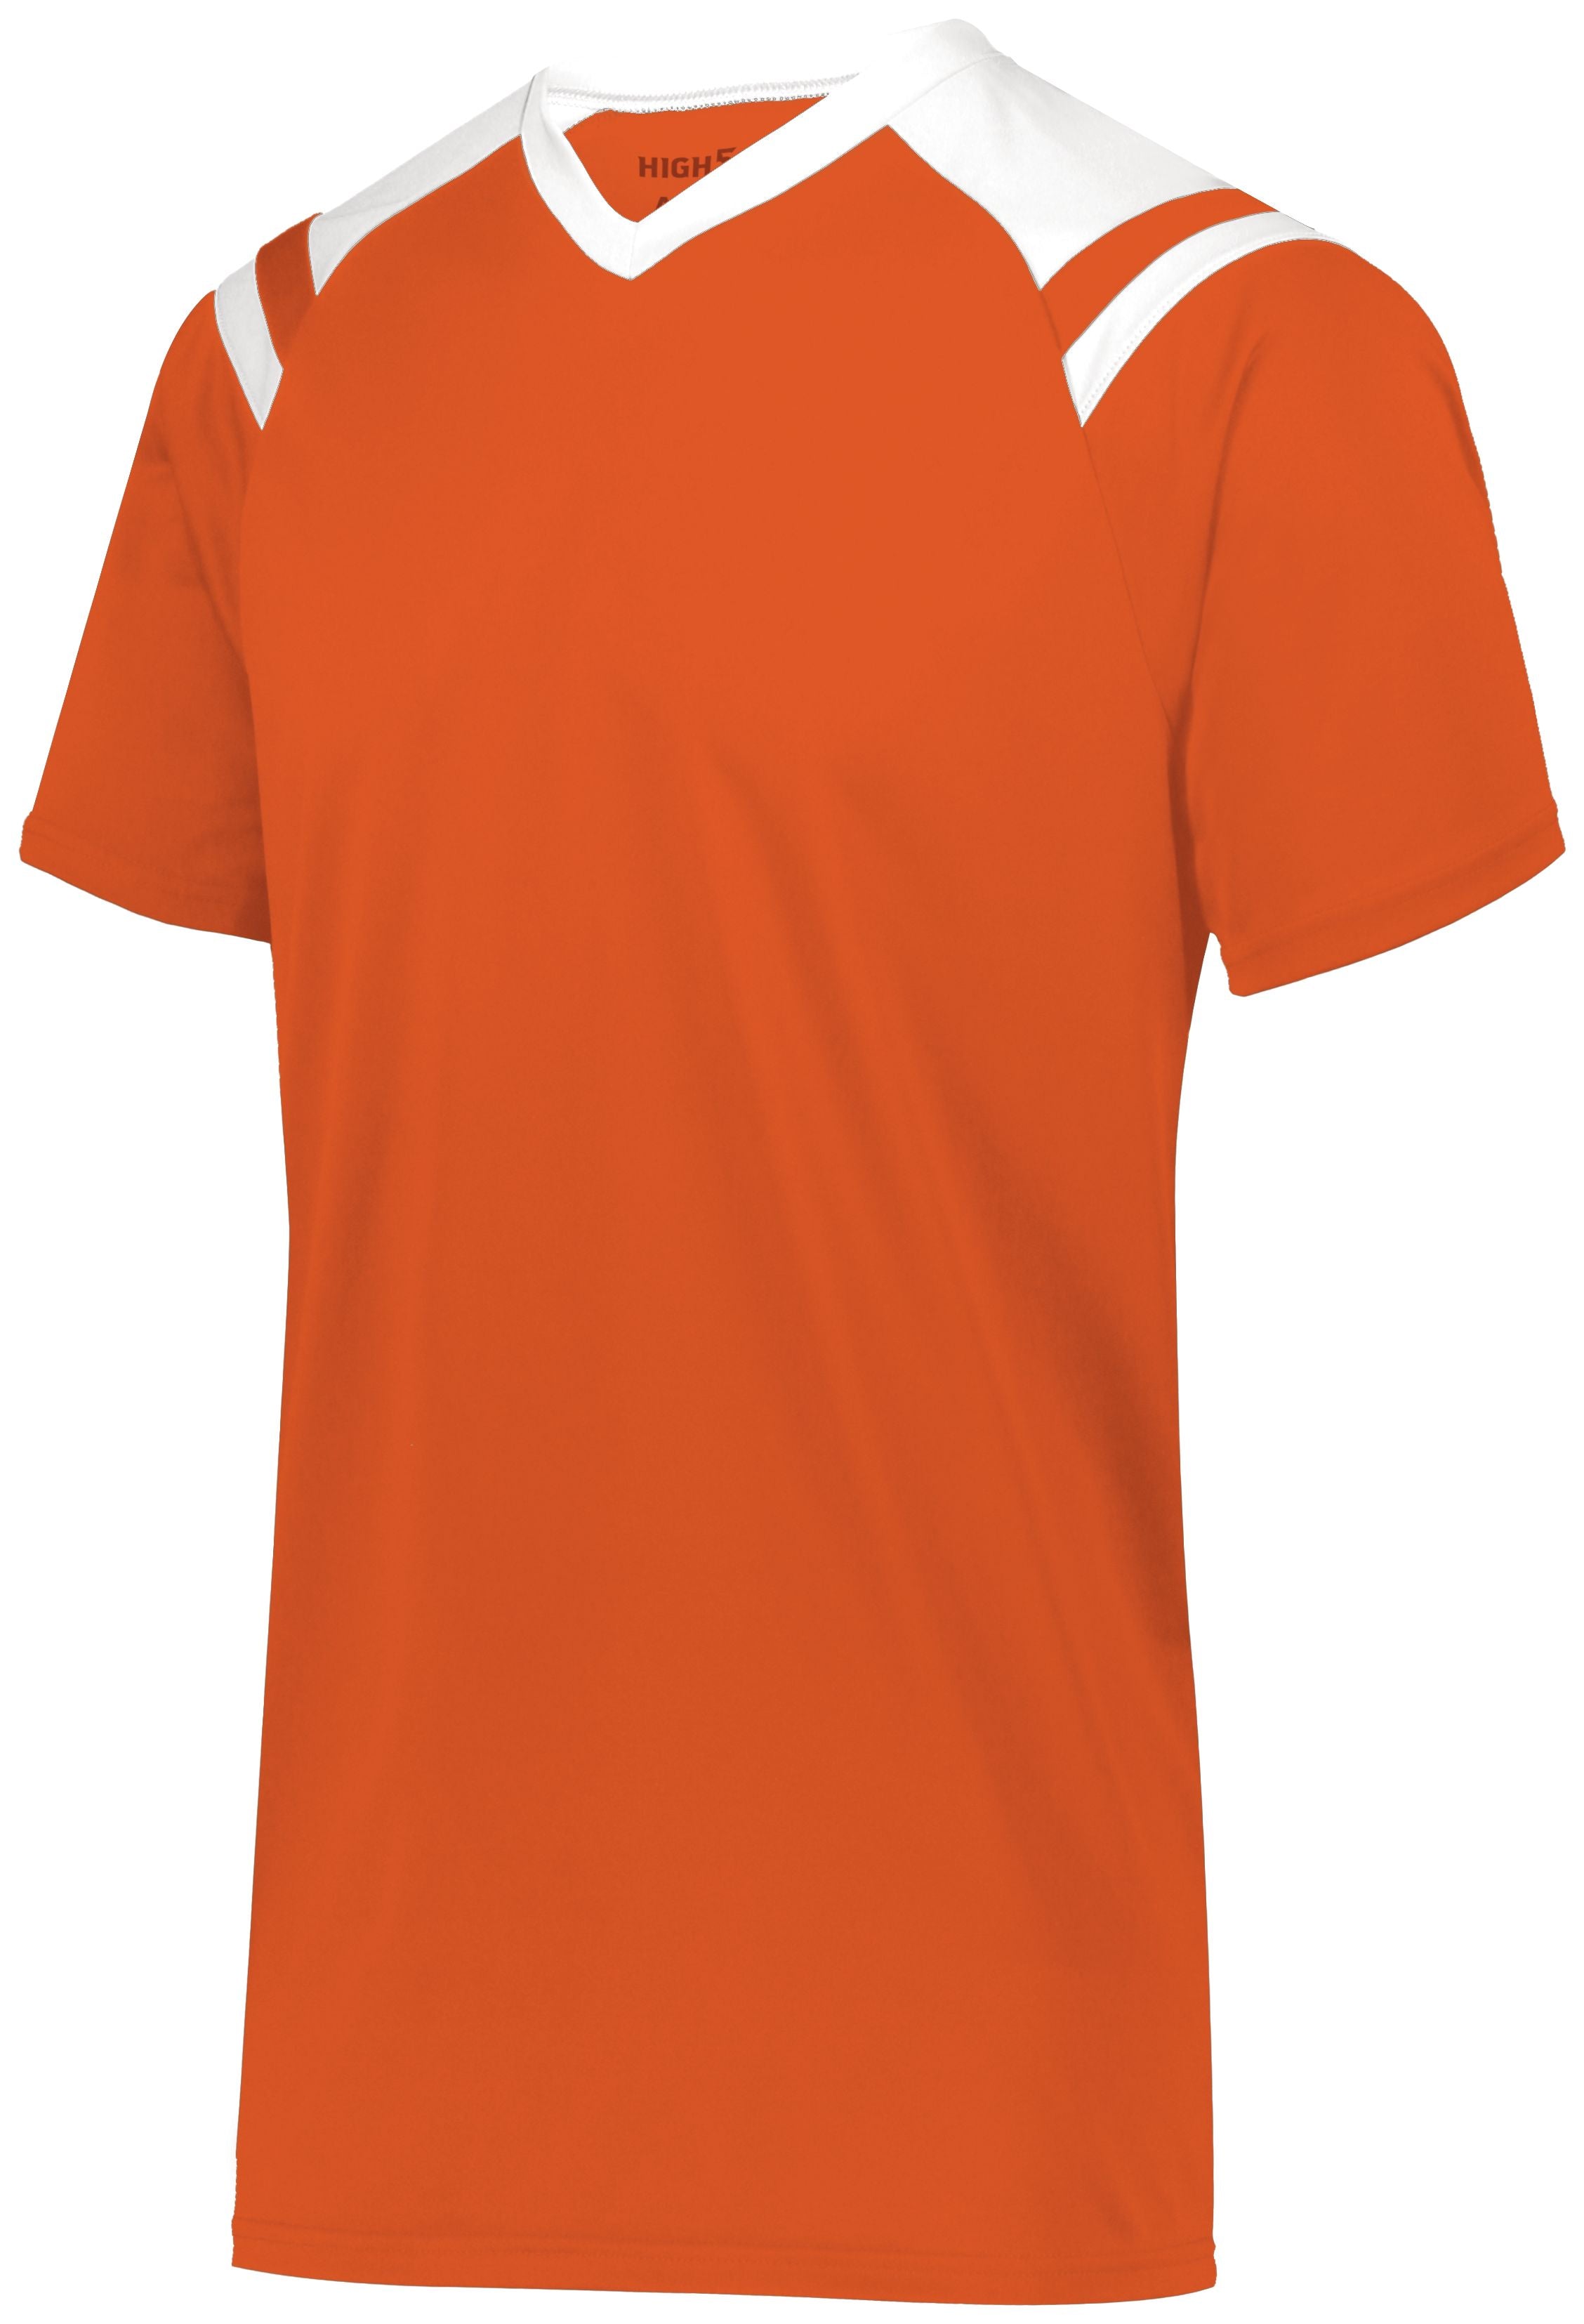 High 5 Youth Sheffield Jersey in Orange/White  -Part of the Youth, Youth-Jersey, High5-Products, Soccer, Shirts, All-Sports-1, Sheffield-Soccer-Jerseys product lines at KanaleyCreations.com